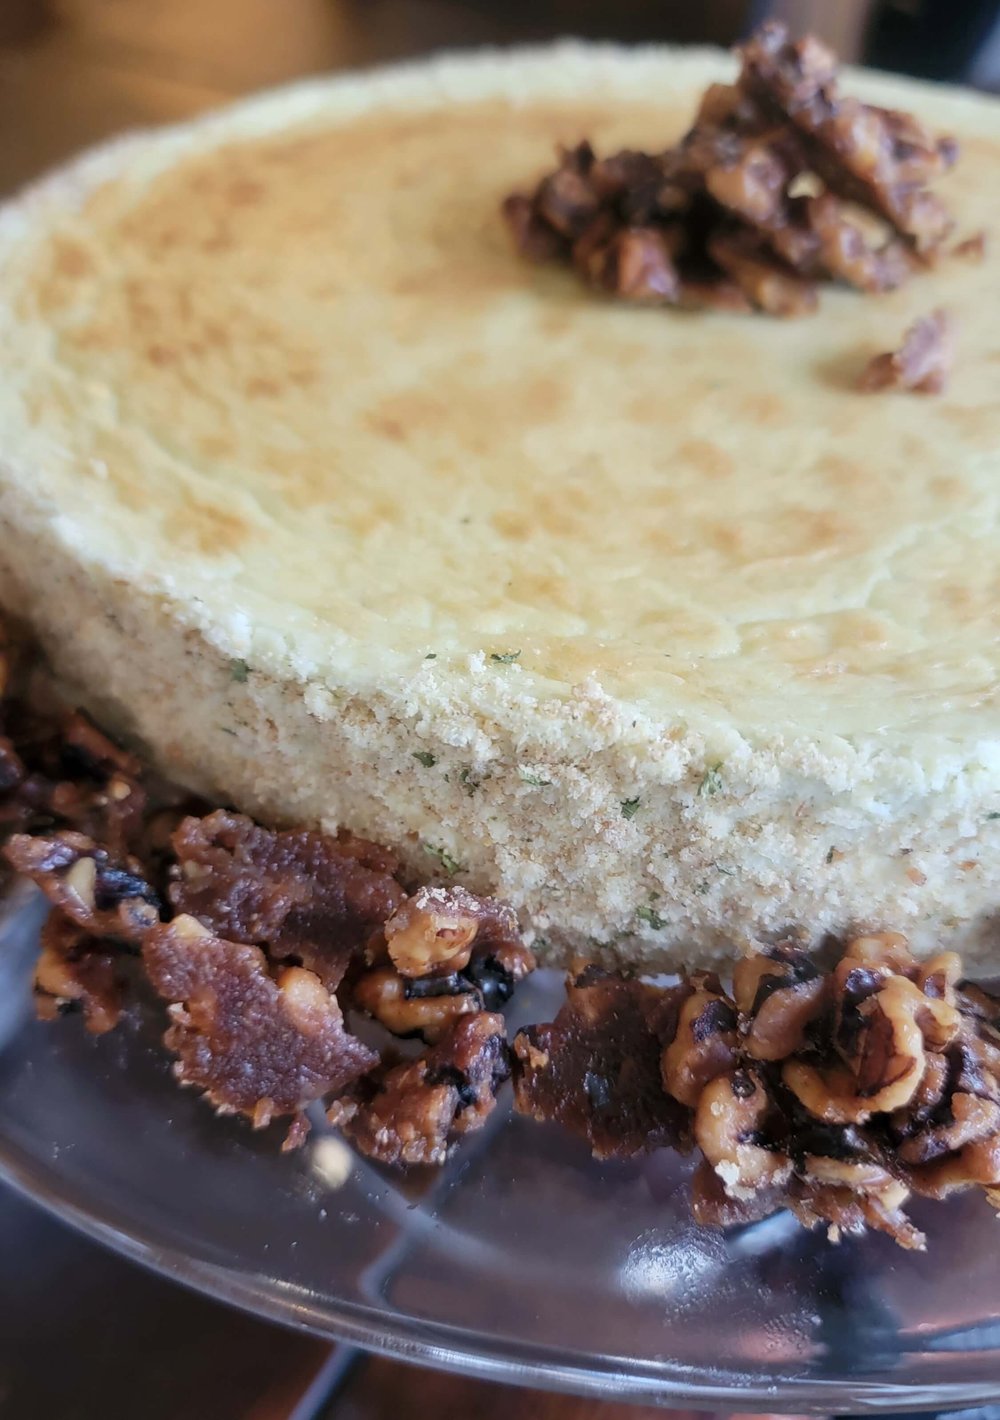 Blue Cheesecake with walnuts